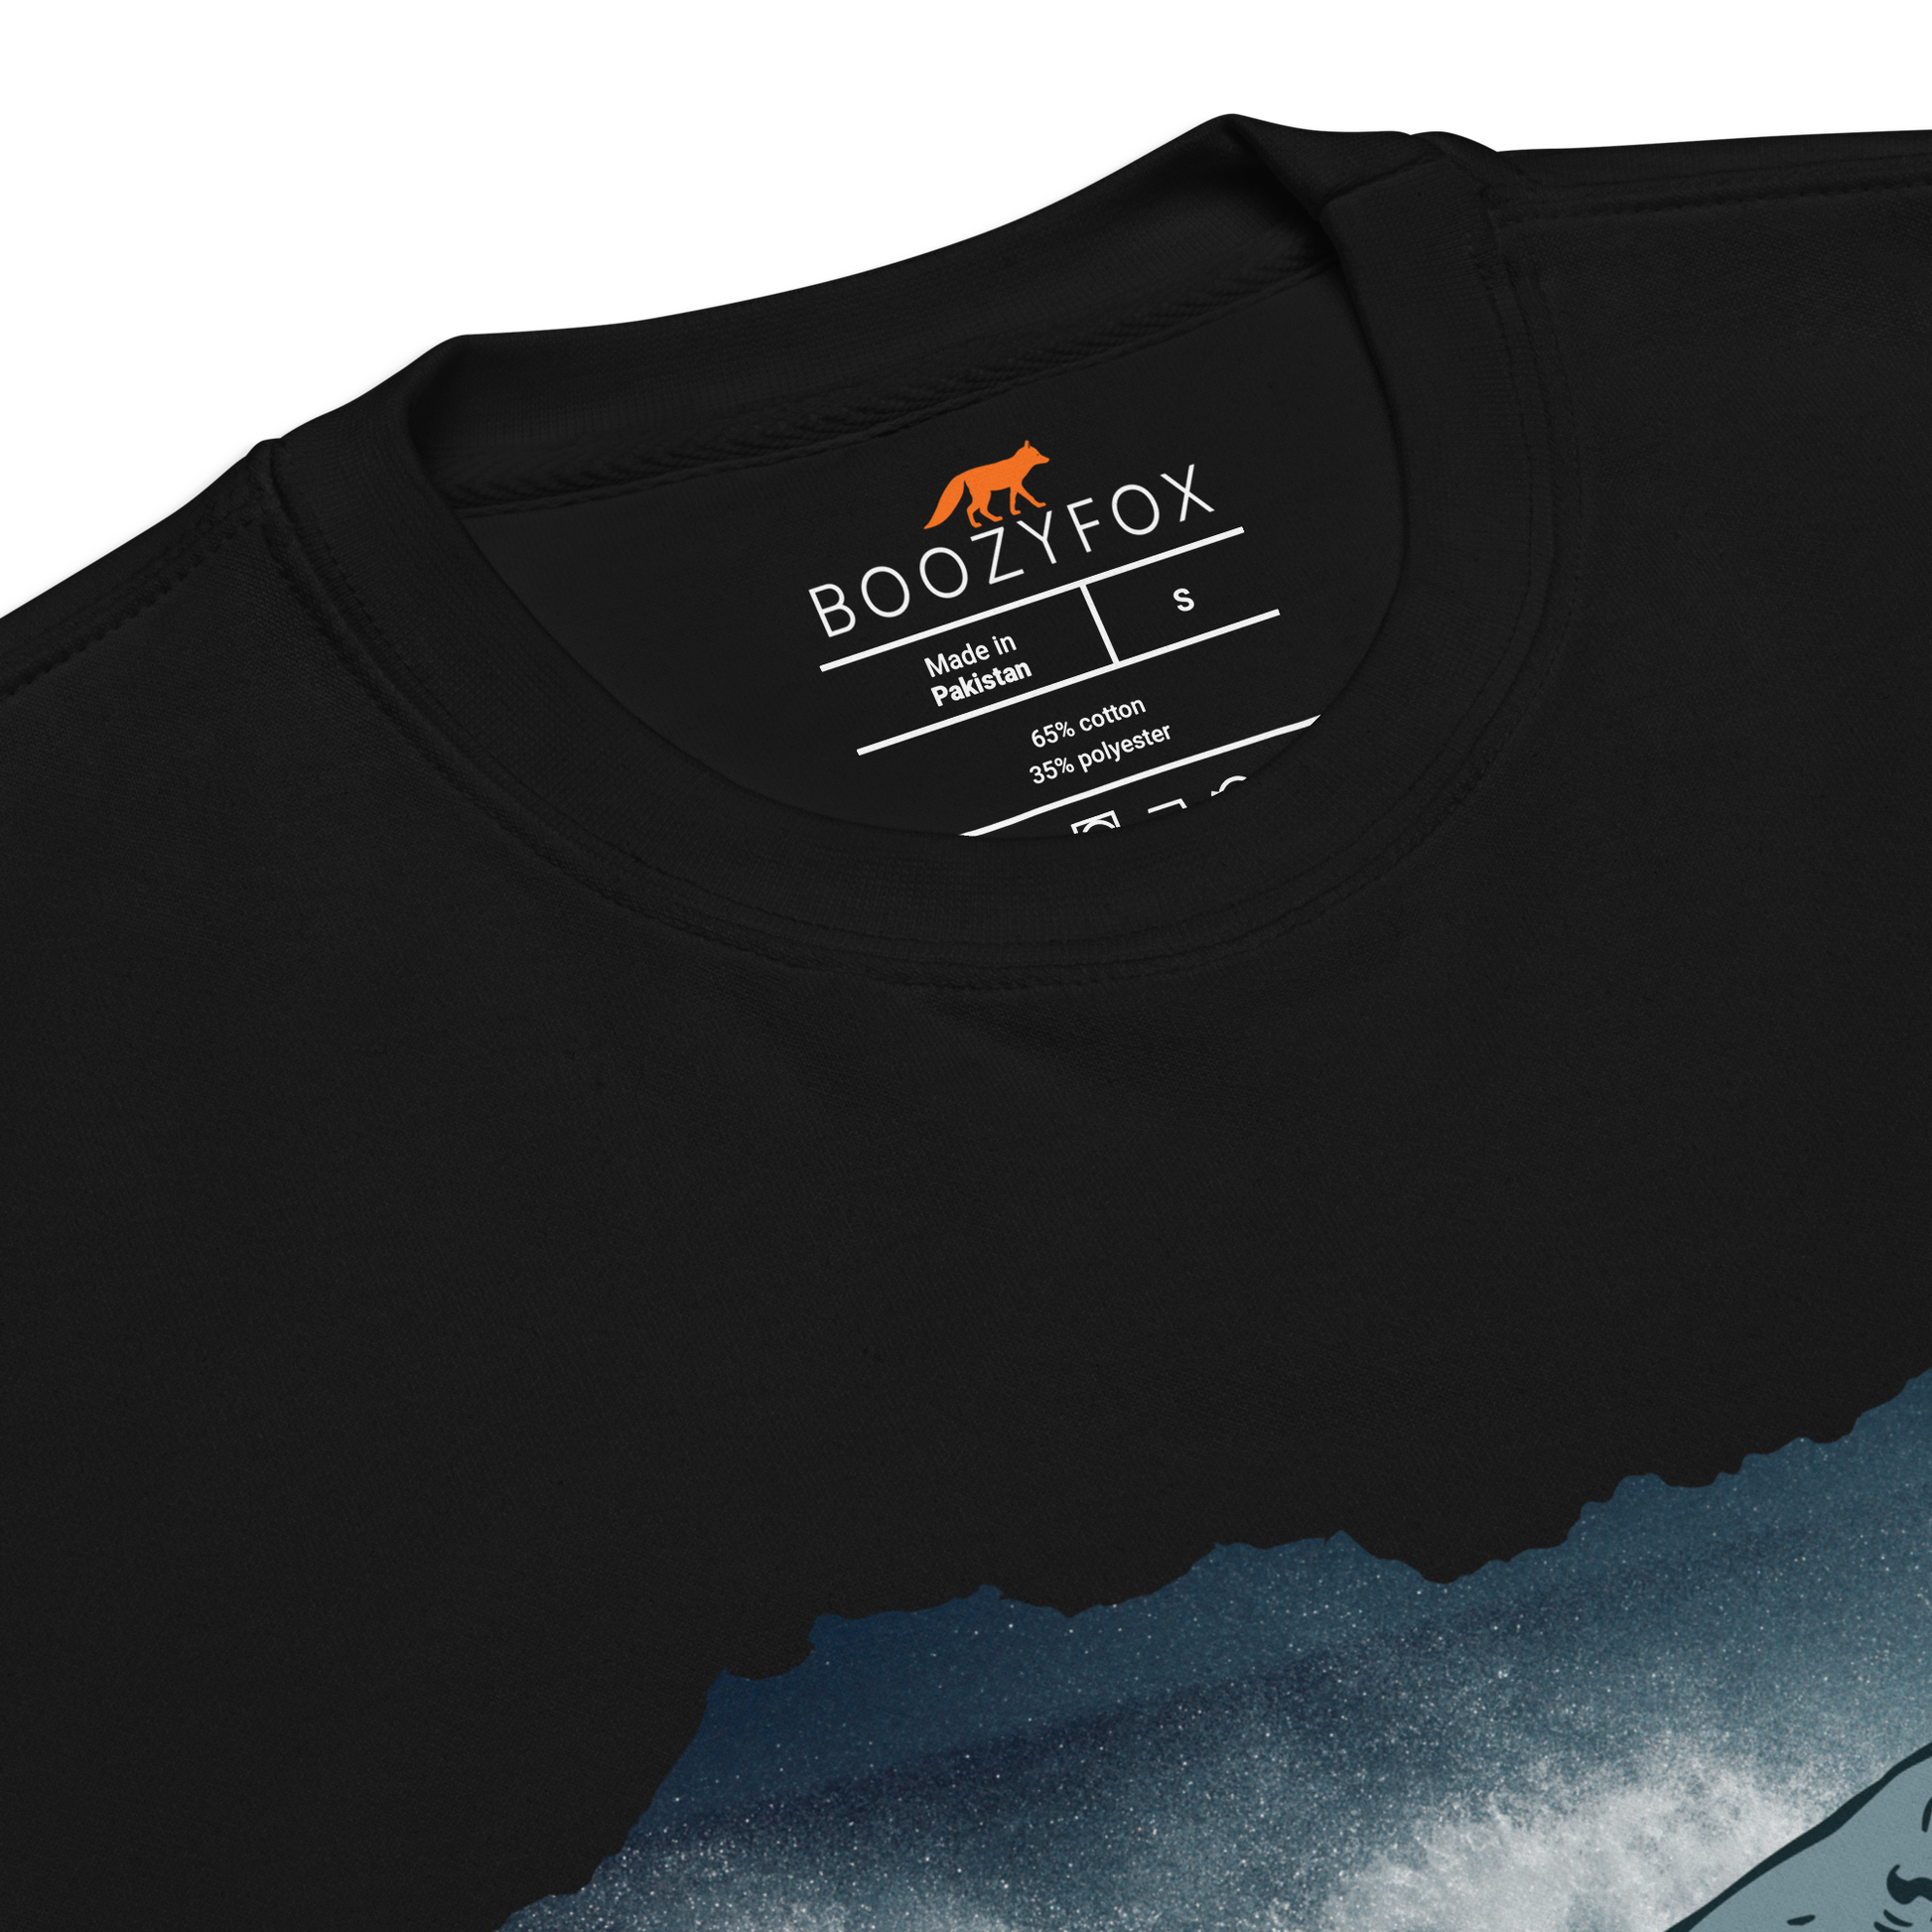 Product details of a Black Premium Megalodon Sweatshirt featuring the jaw-dropping 'A Bite Above the Rest' graphic on the chest - Funny Graphic Megalodon Sweatshirts - Boozy Fox